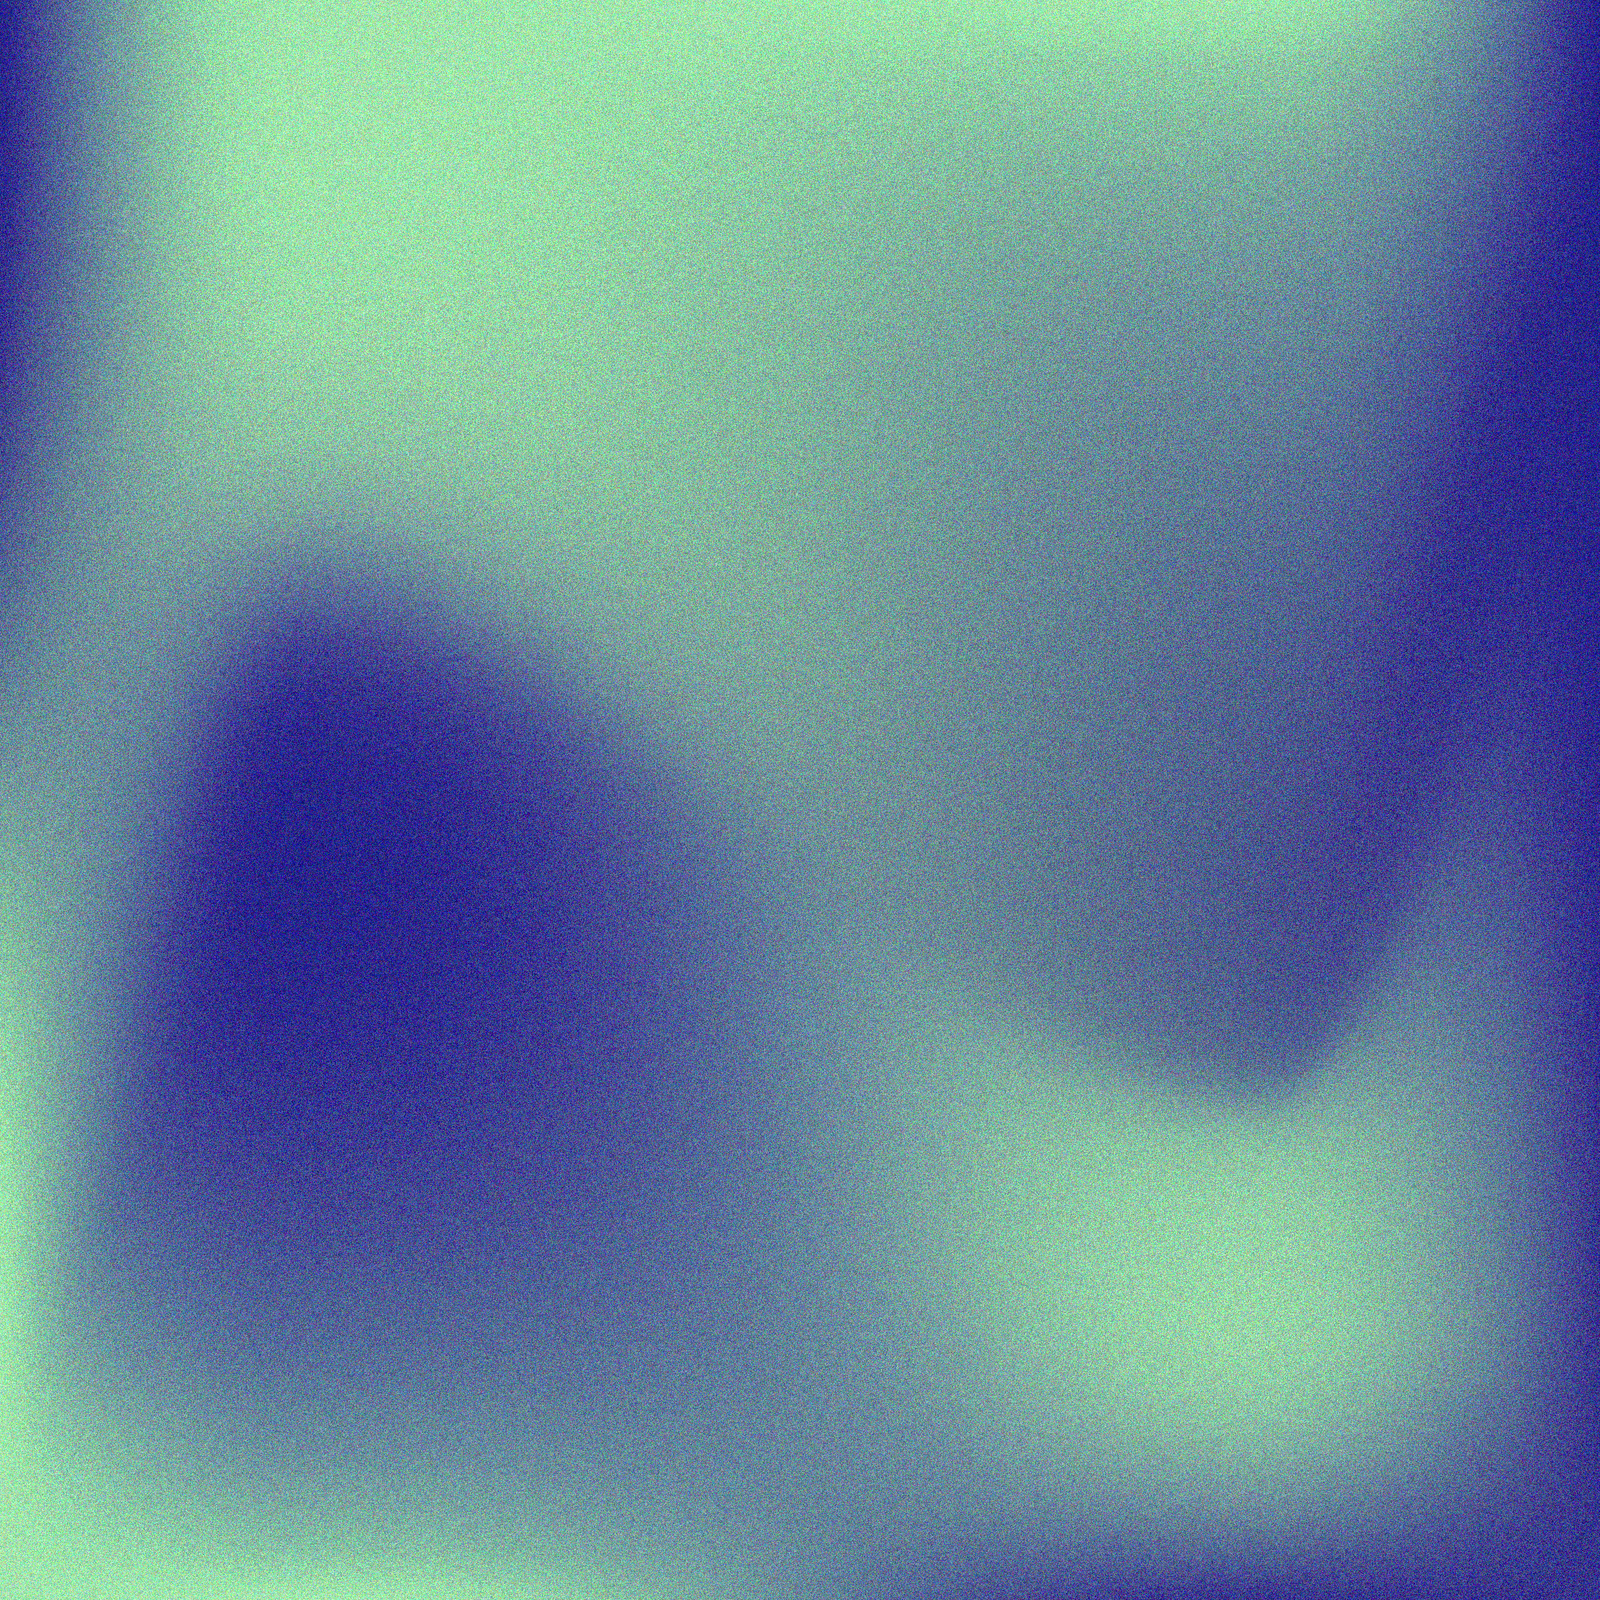 Background grain blue and green gradient